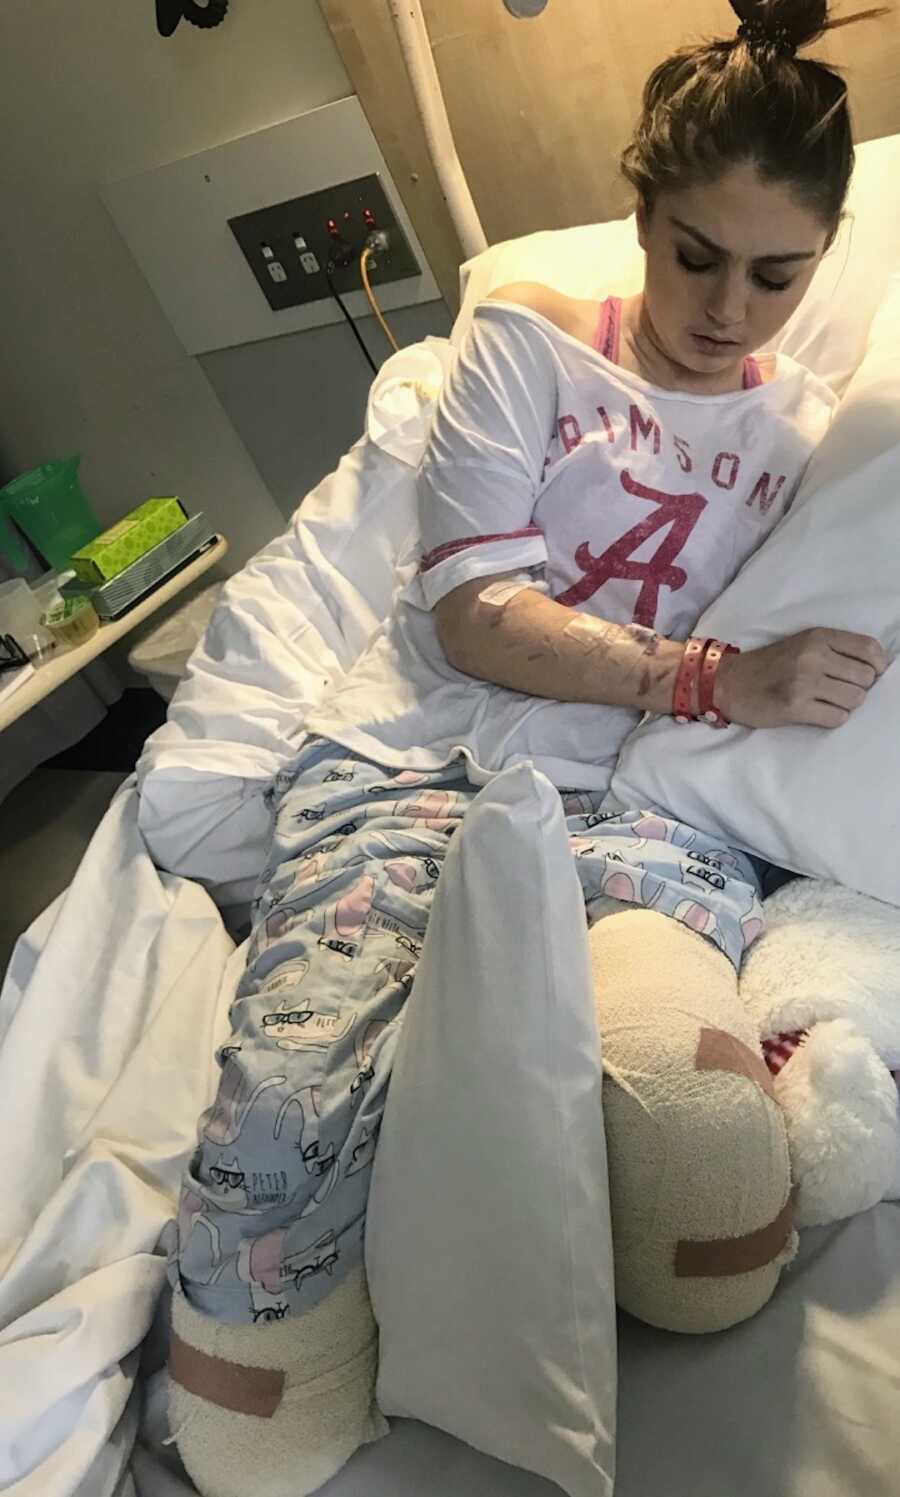 suicide survivor and amputee lays in hospital bed after amputation